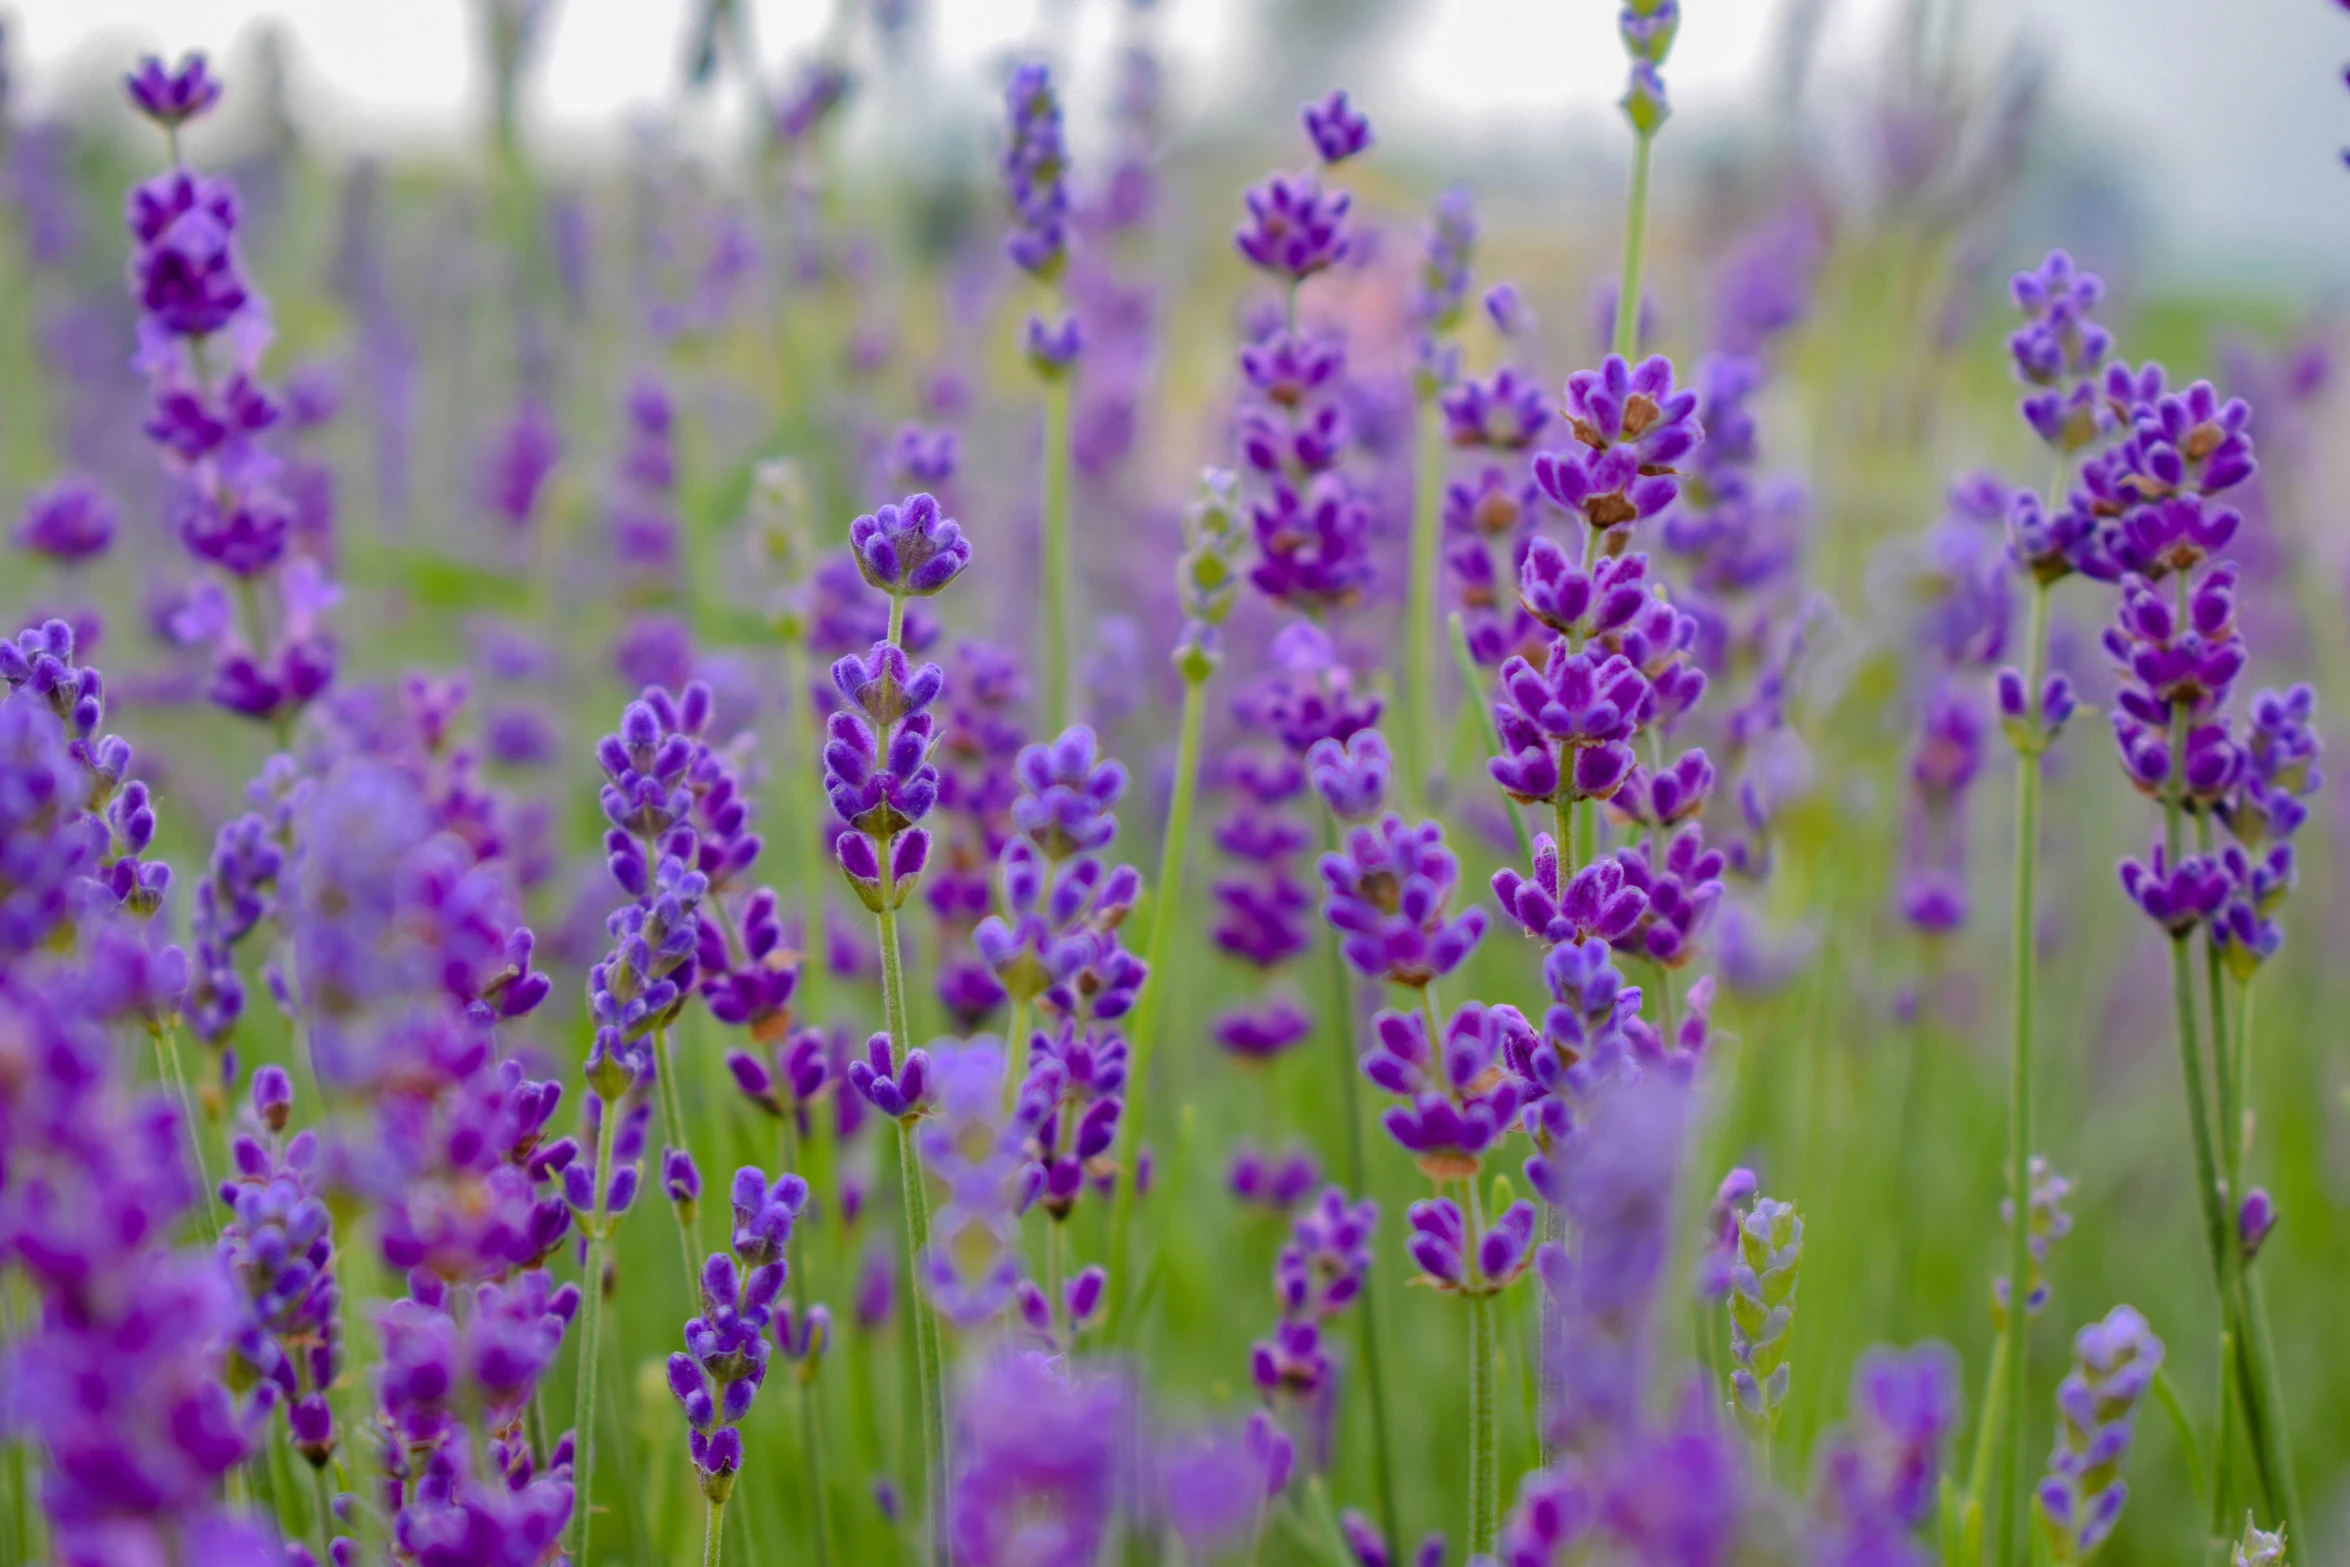 many purple flowers blooming in the grass